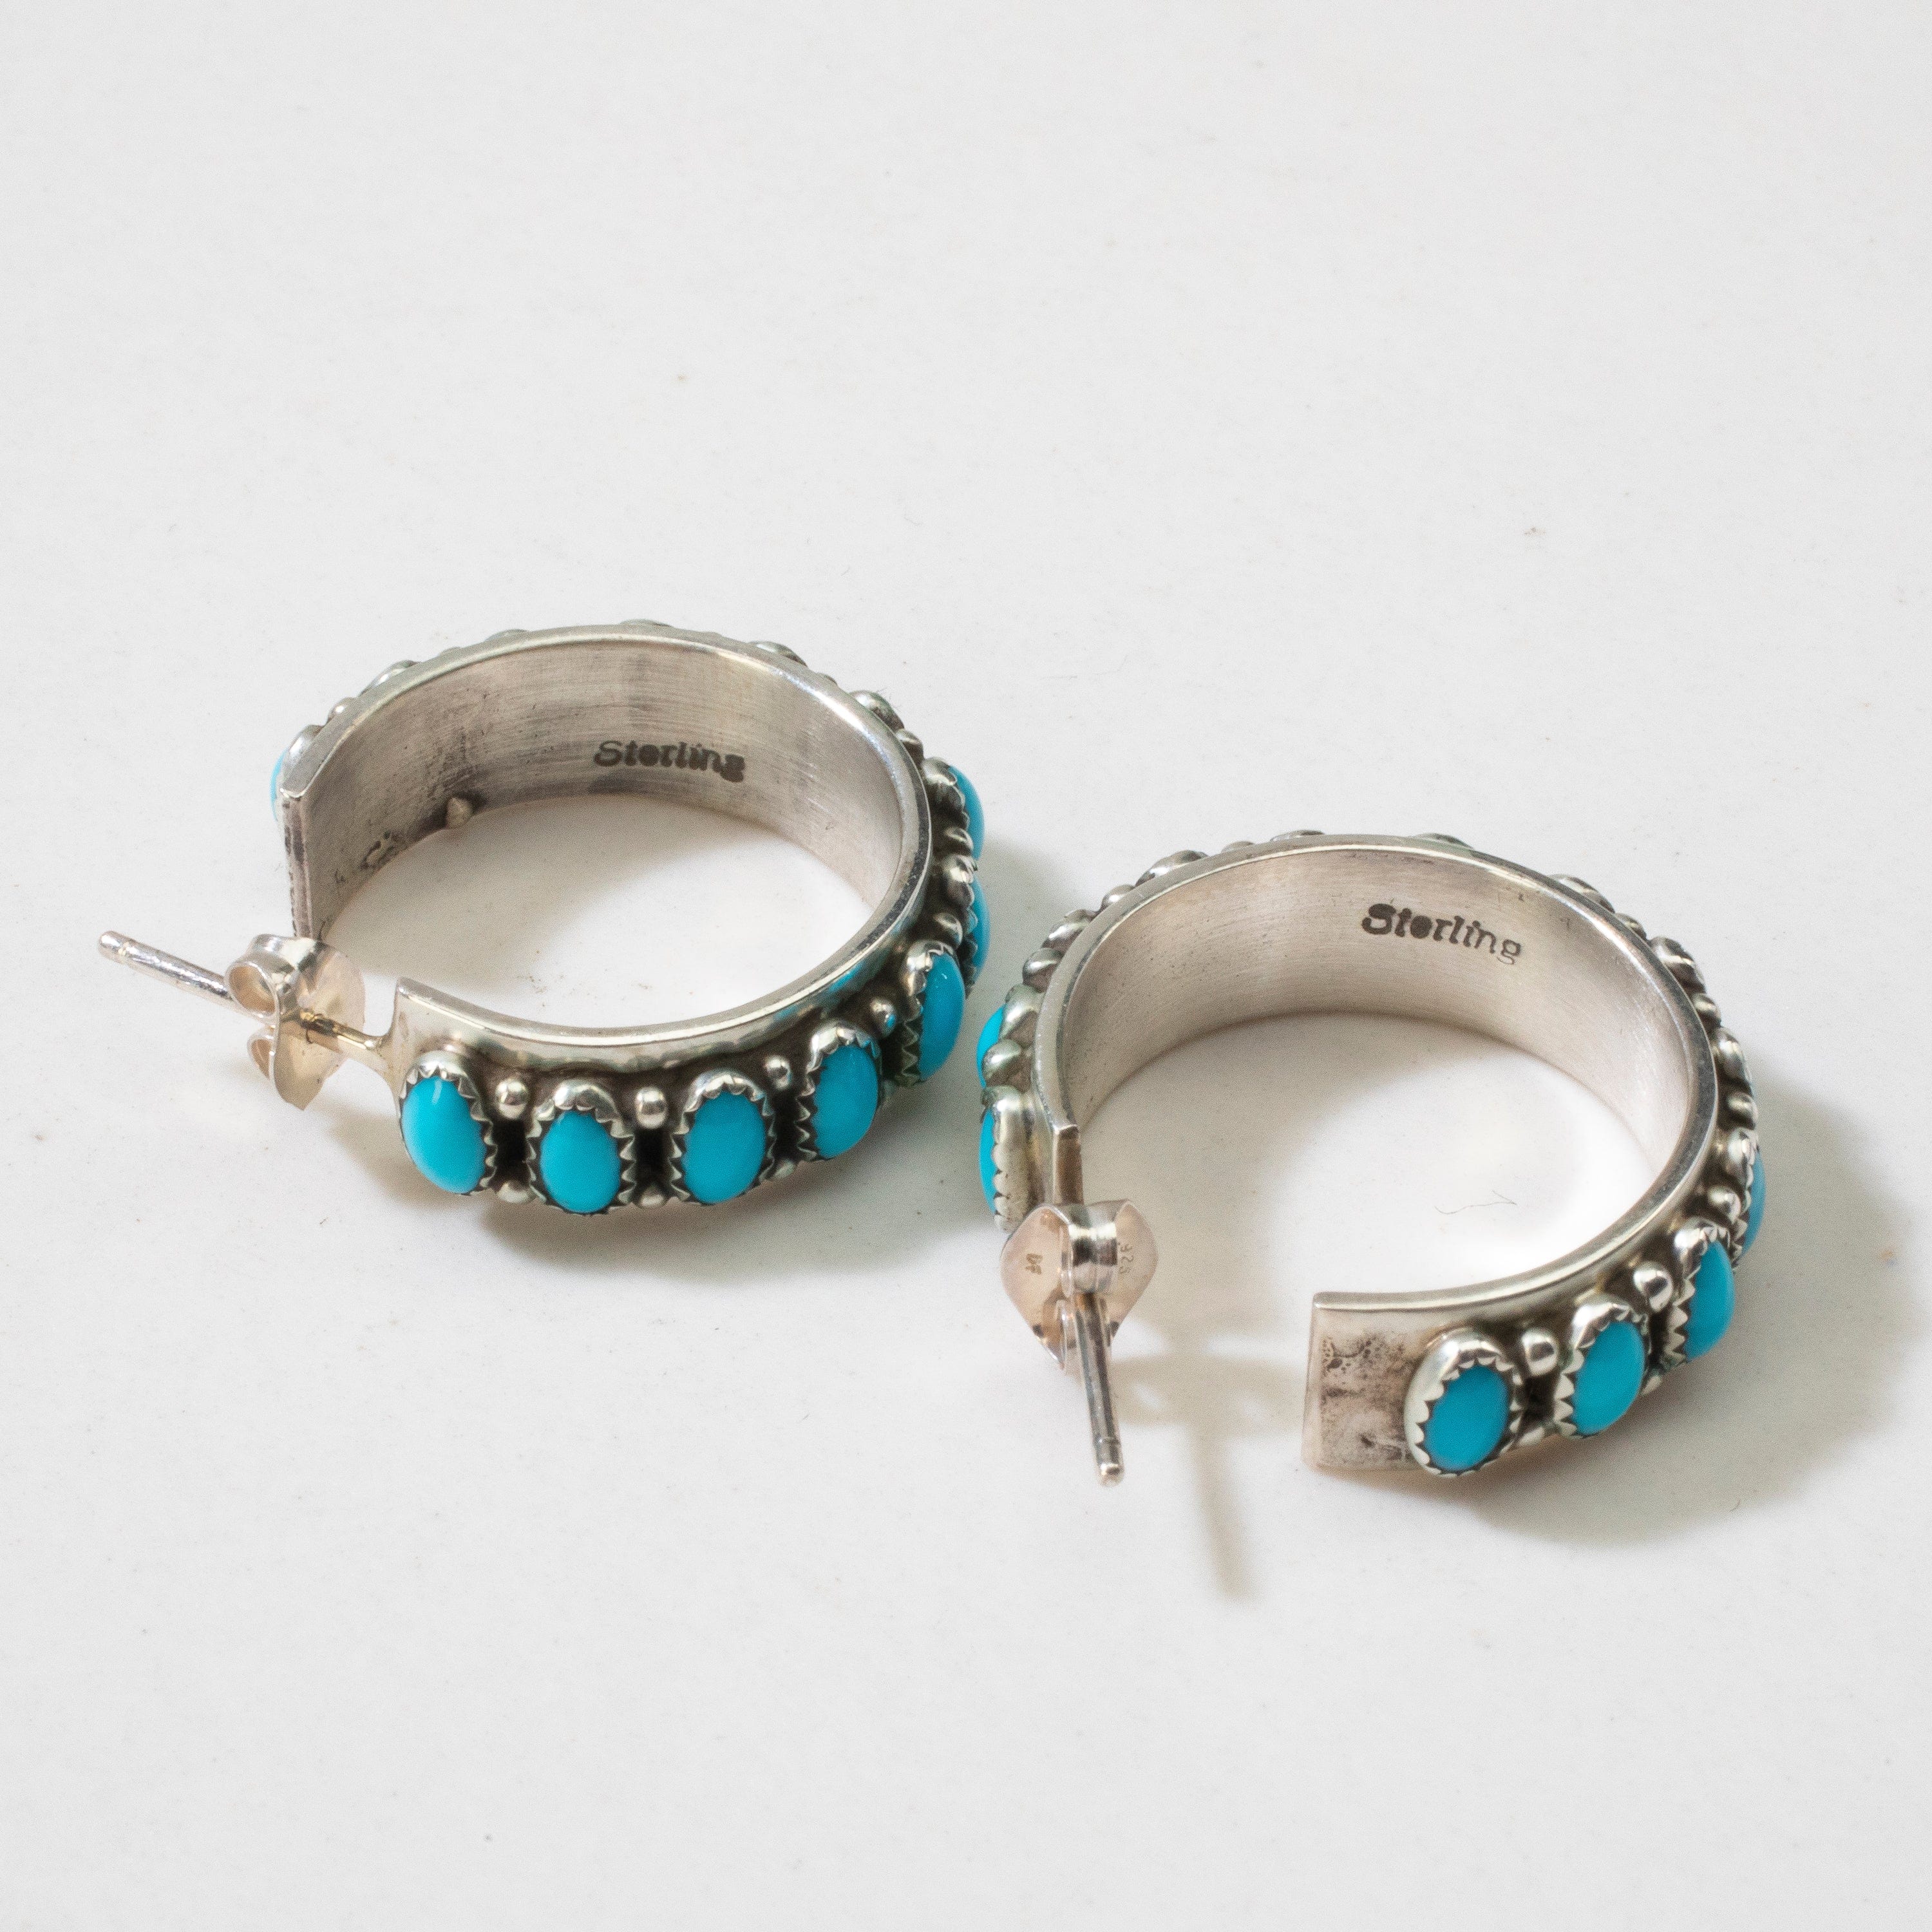 Kalifano Native American Jewelry Sleeping Beauty Turquoise Hoop Navajo USA Native American Made 925 Sterling Silver Earrings with Stud Backing NAE800.007